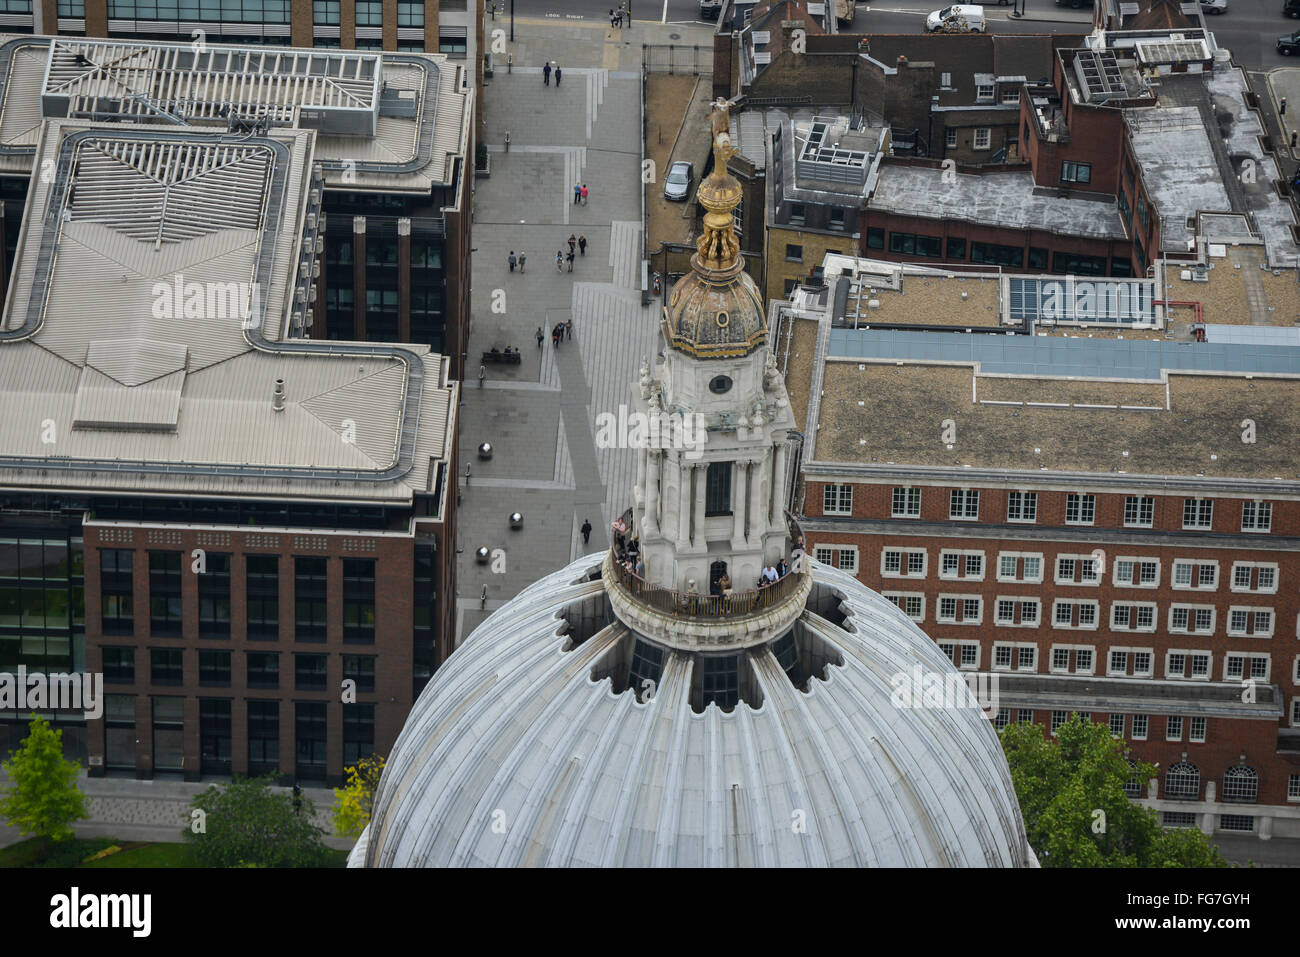 A close up aerial view of the top of the dome of St Pauls Cathedral, London Stock Photo